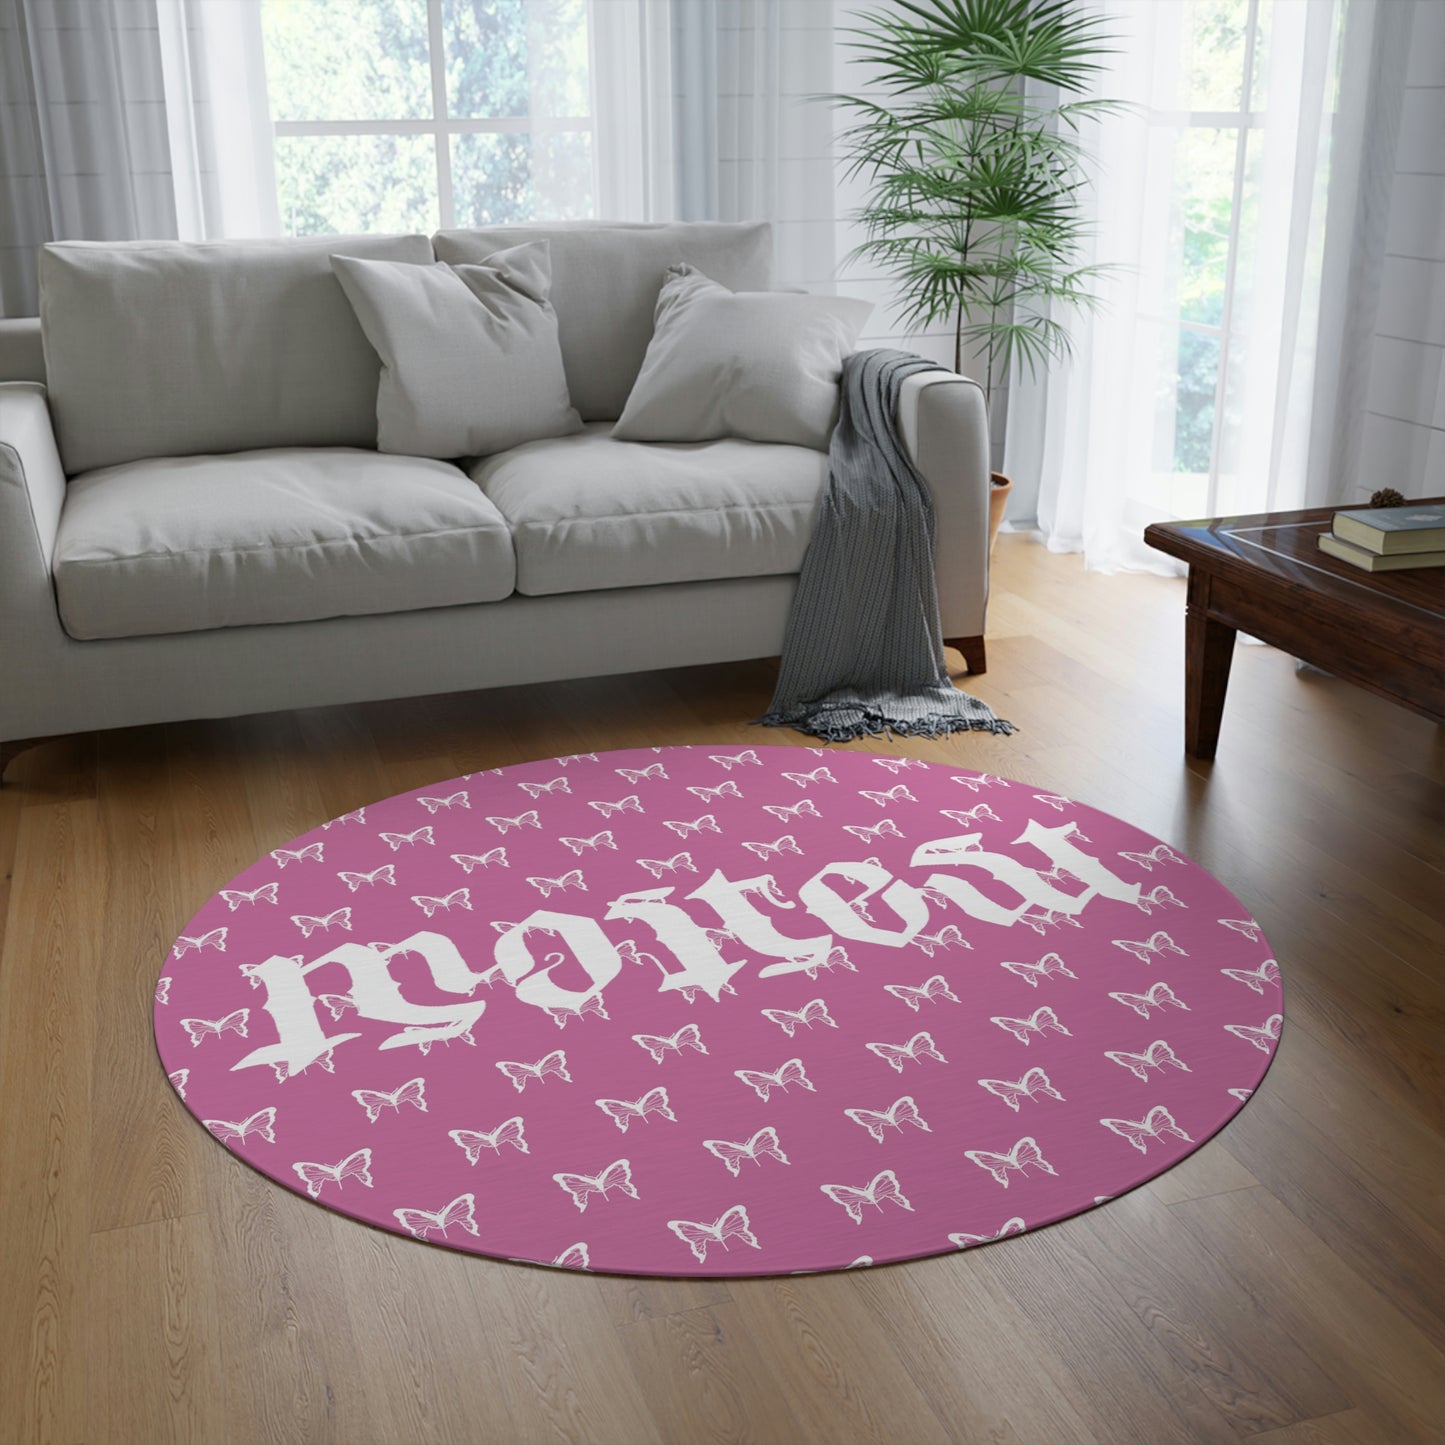 Pink Butterfly Effect 5’ Round Rug